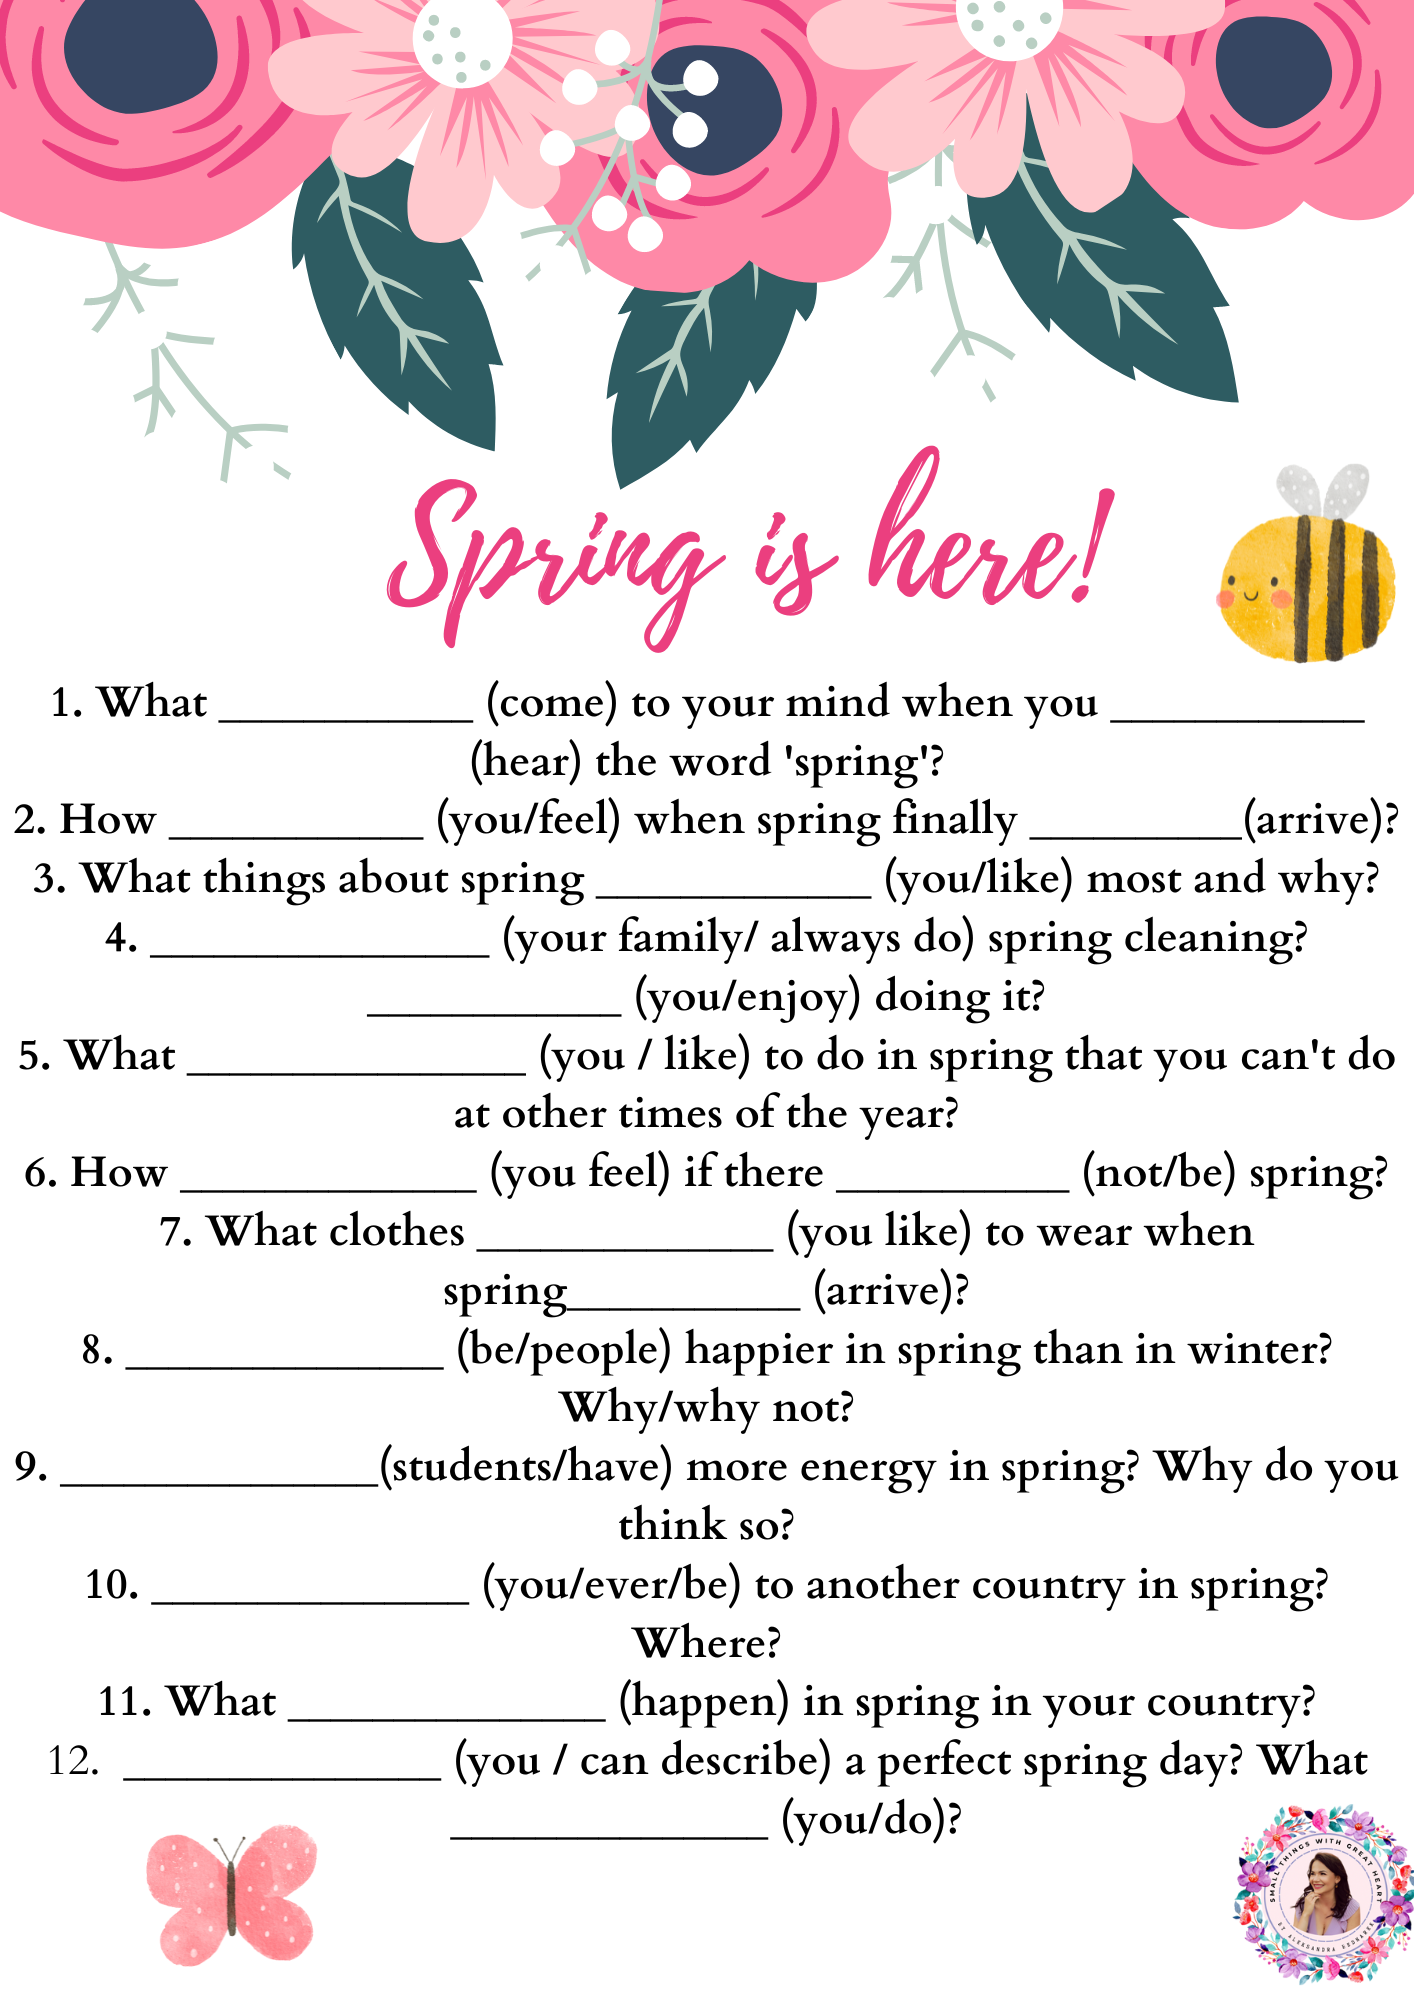 Spring is here - worksheet_Small things with great heart-2